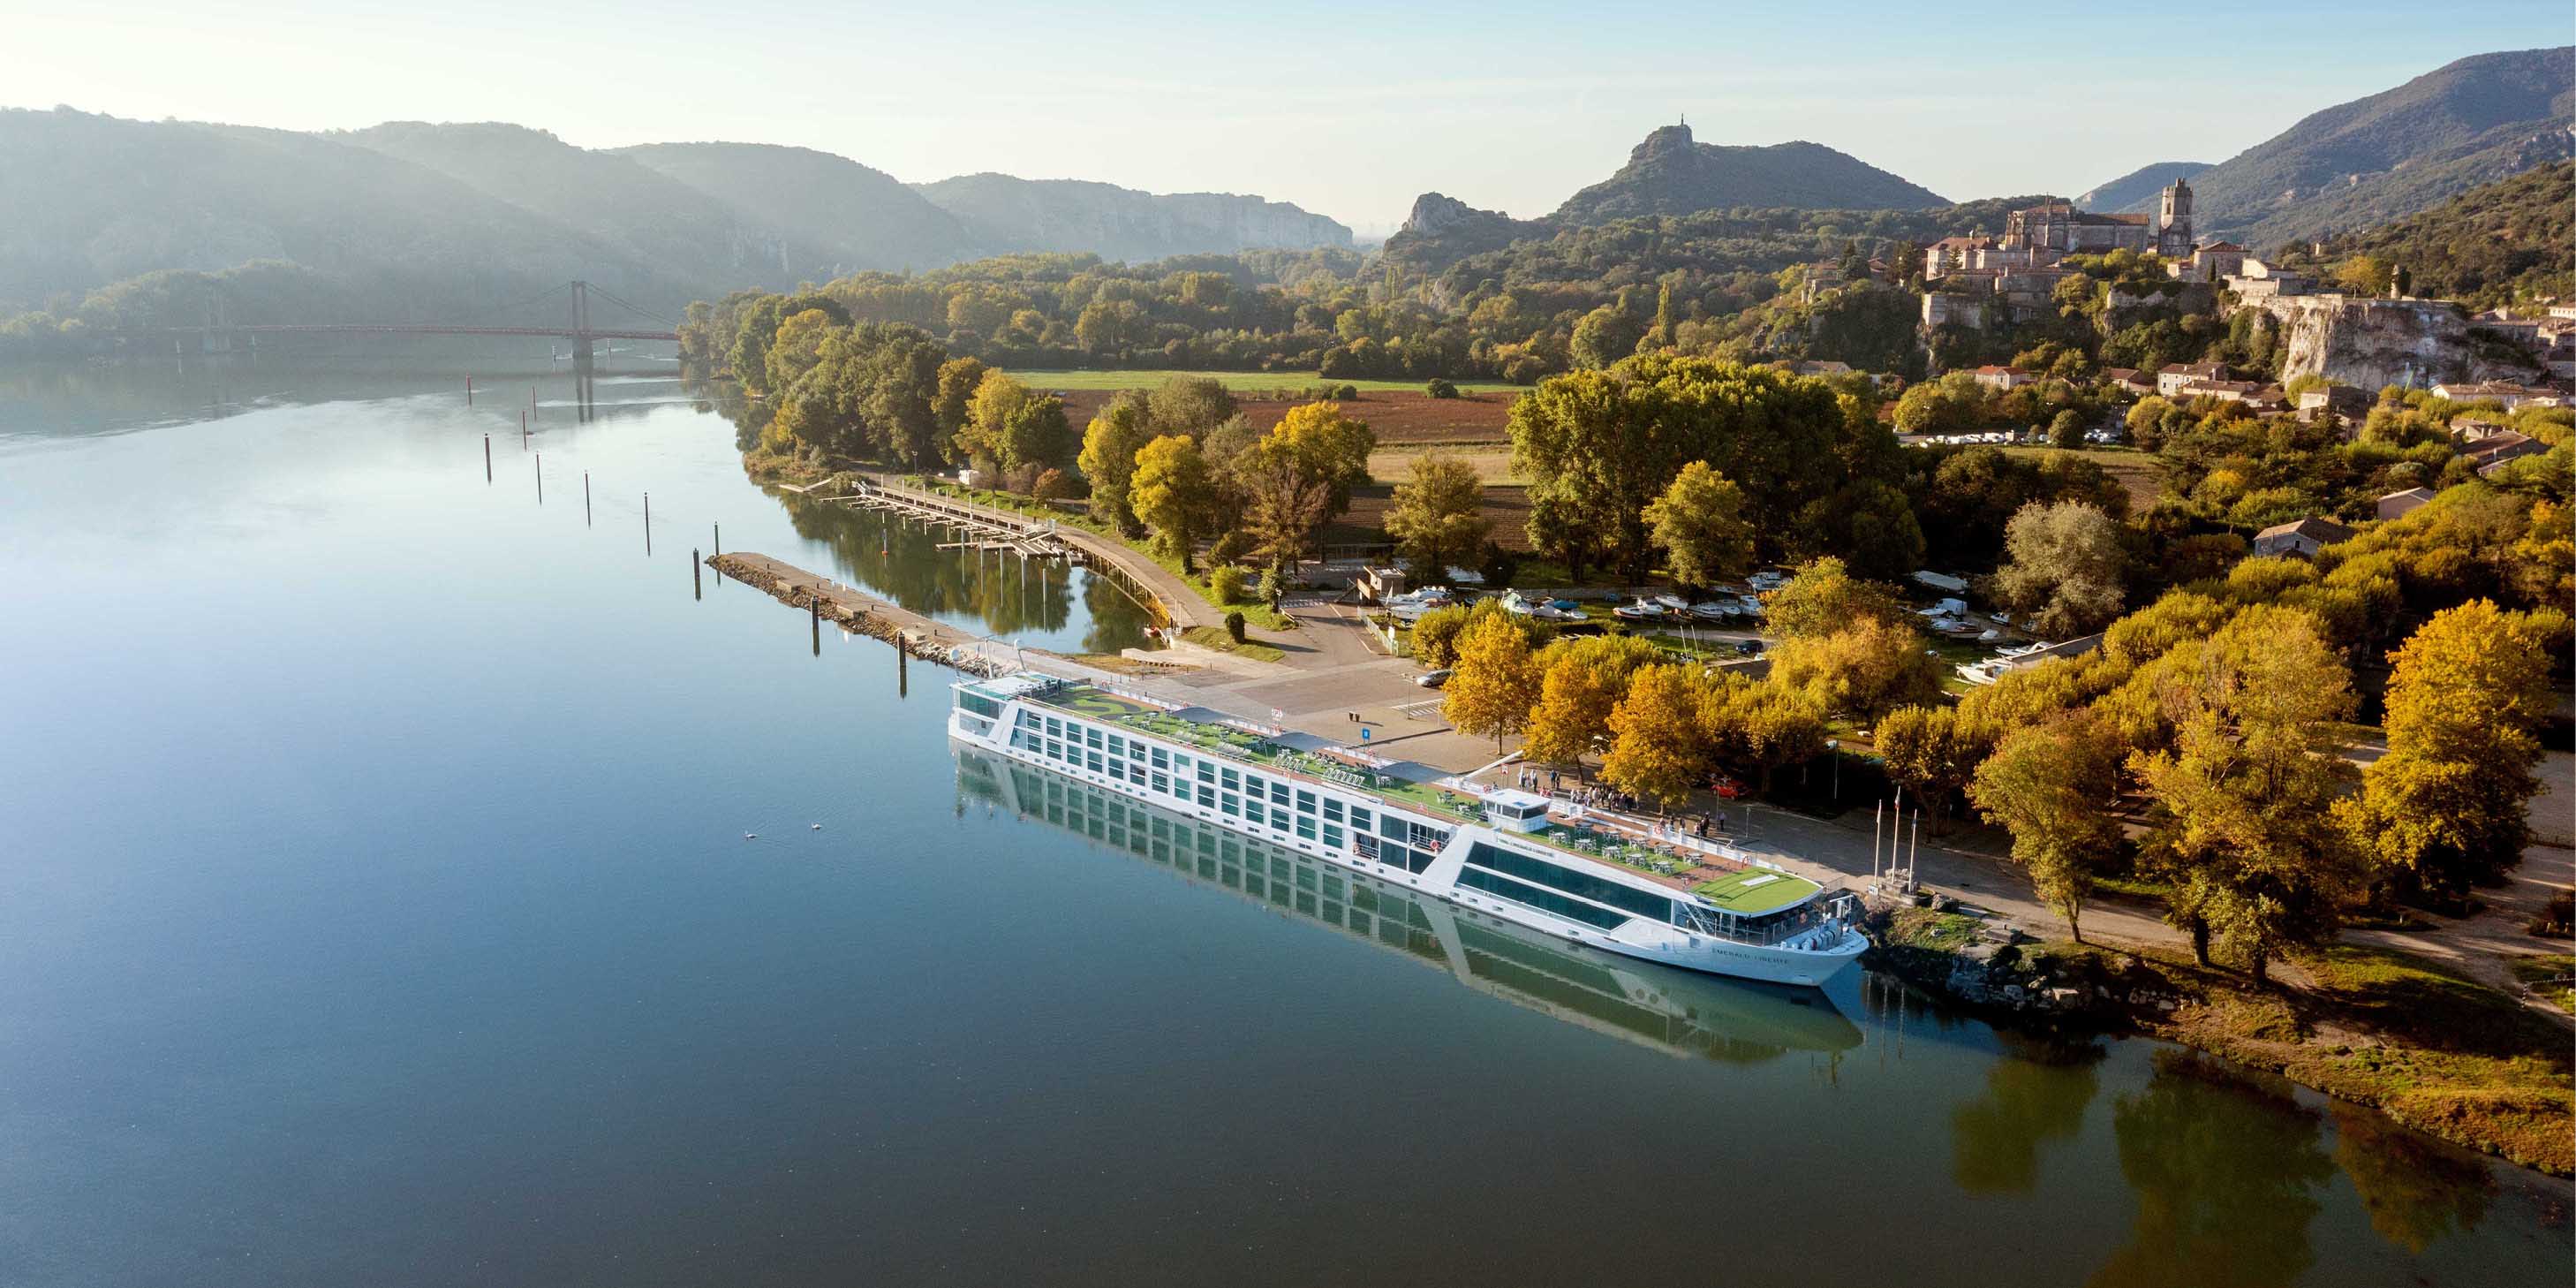 Emerald Cruises luxury Star-Ship docked in Viviers, a quaint French town nestled on the banks of the Rhône River.